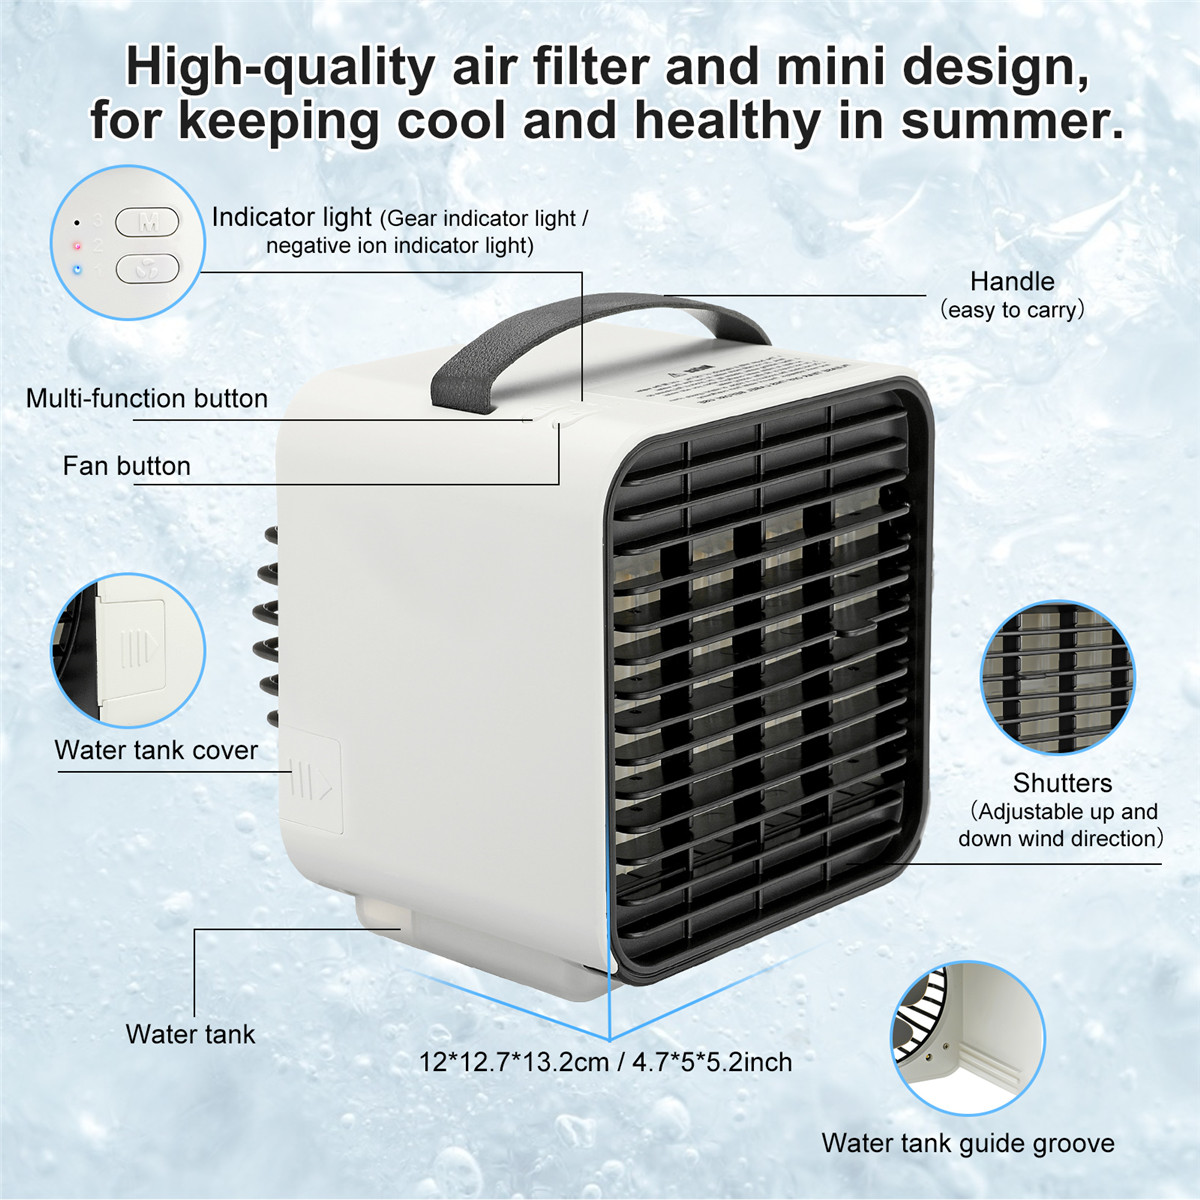 4-in-1-Mini-Air-Cooler-Portable-USB-Air-Conditioning-2000mAh-Cooling-Fan-3-Wind-Speed-Adjustment-Nig-1885394-1